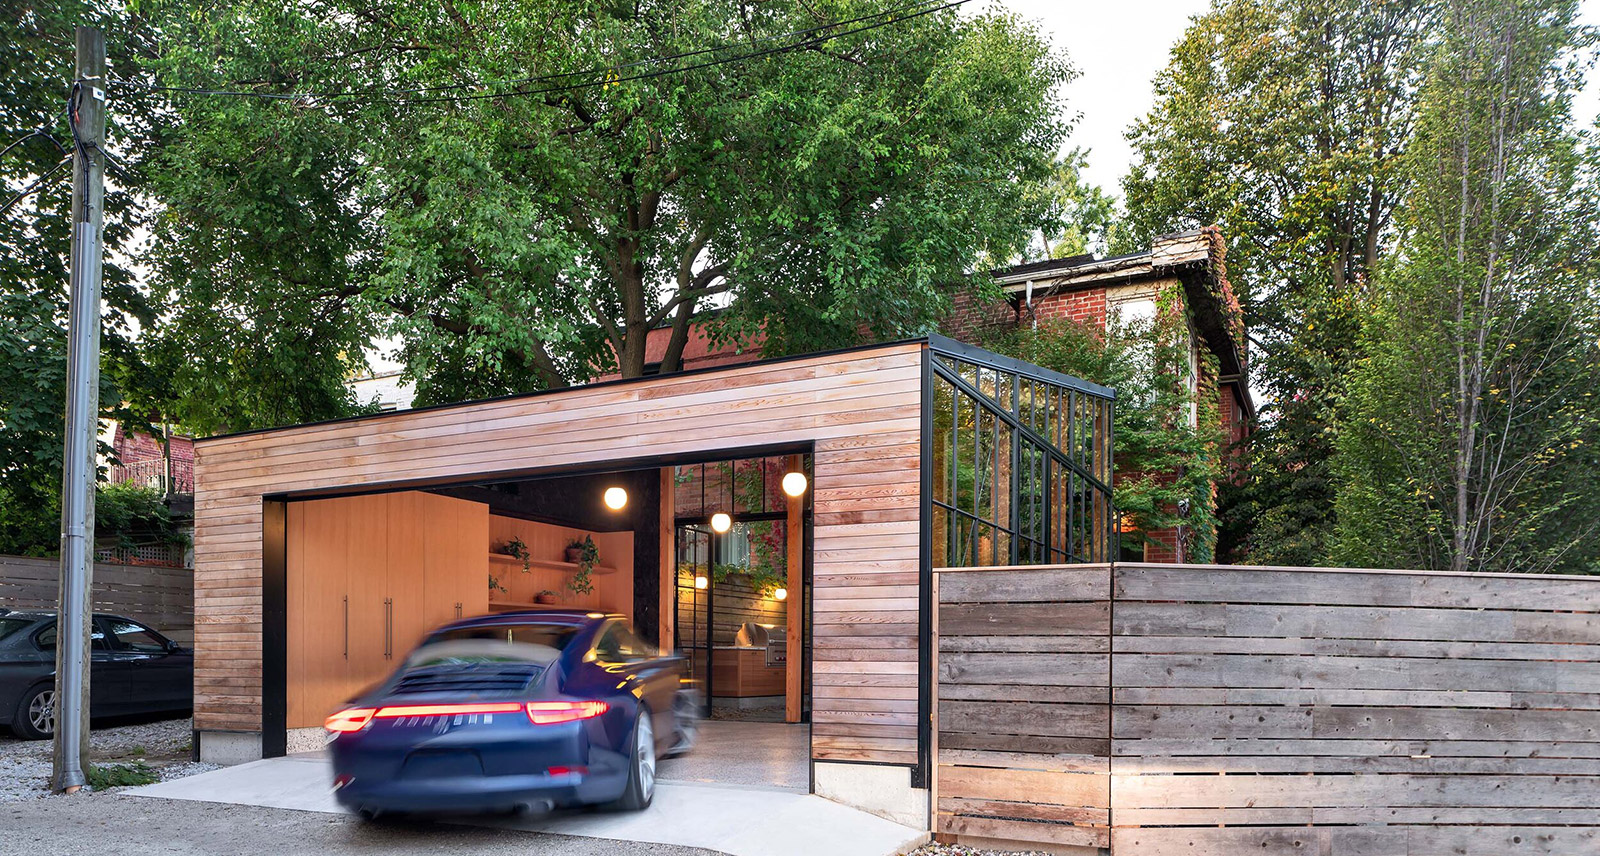 With the Multi-Use "Garage Gem", Craig Follett and Office Ou Prove That a Garage Can Be So Much More